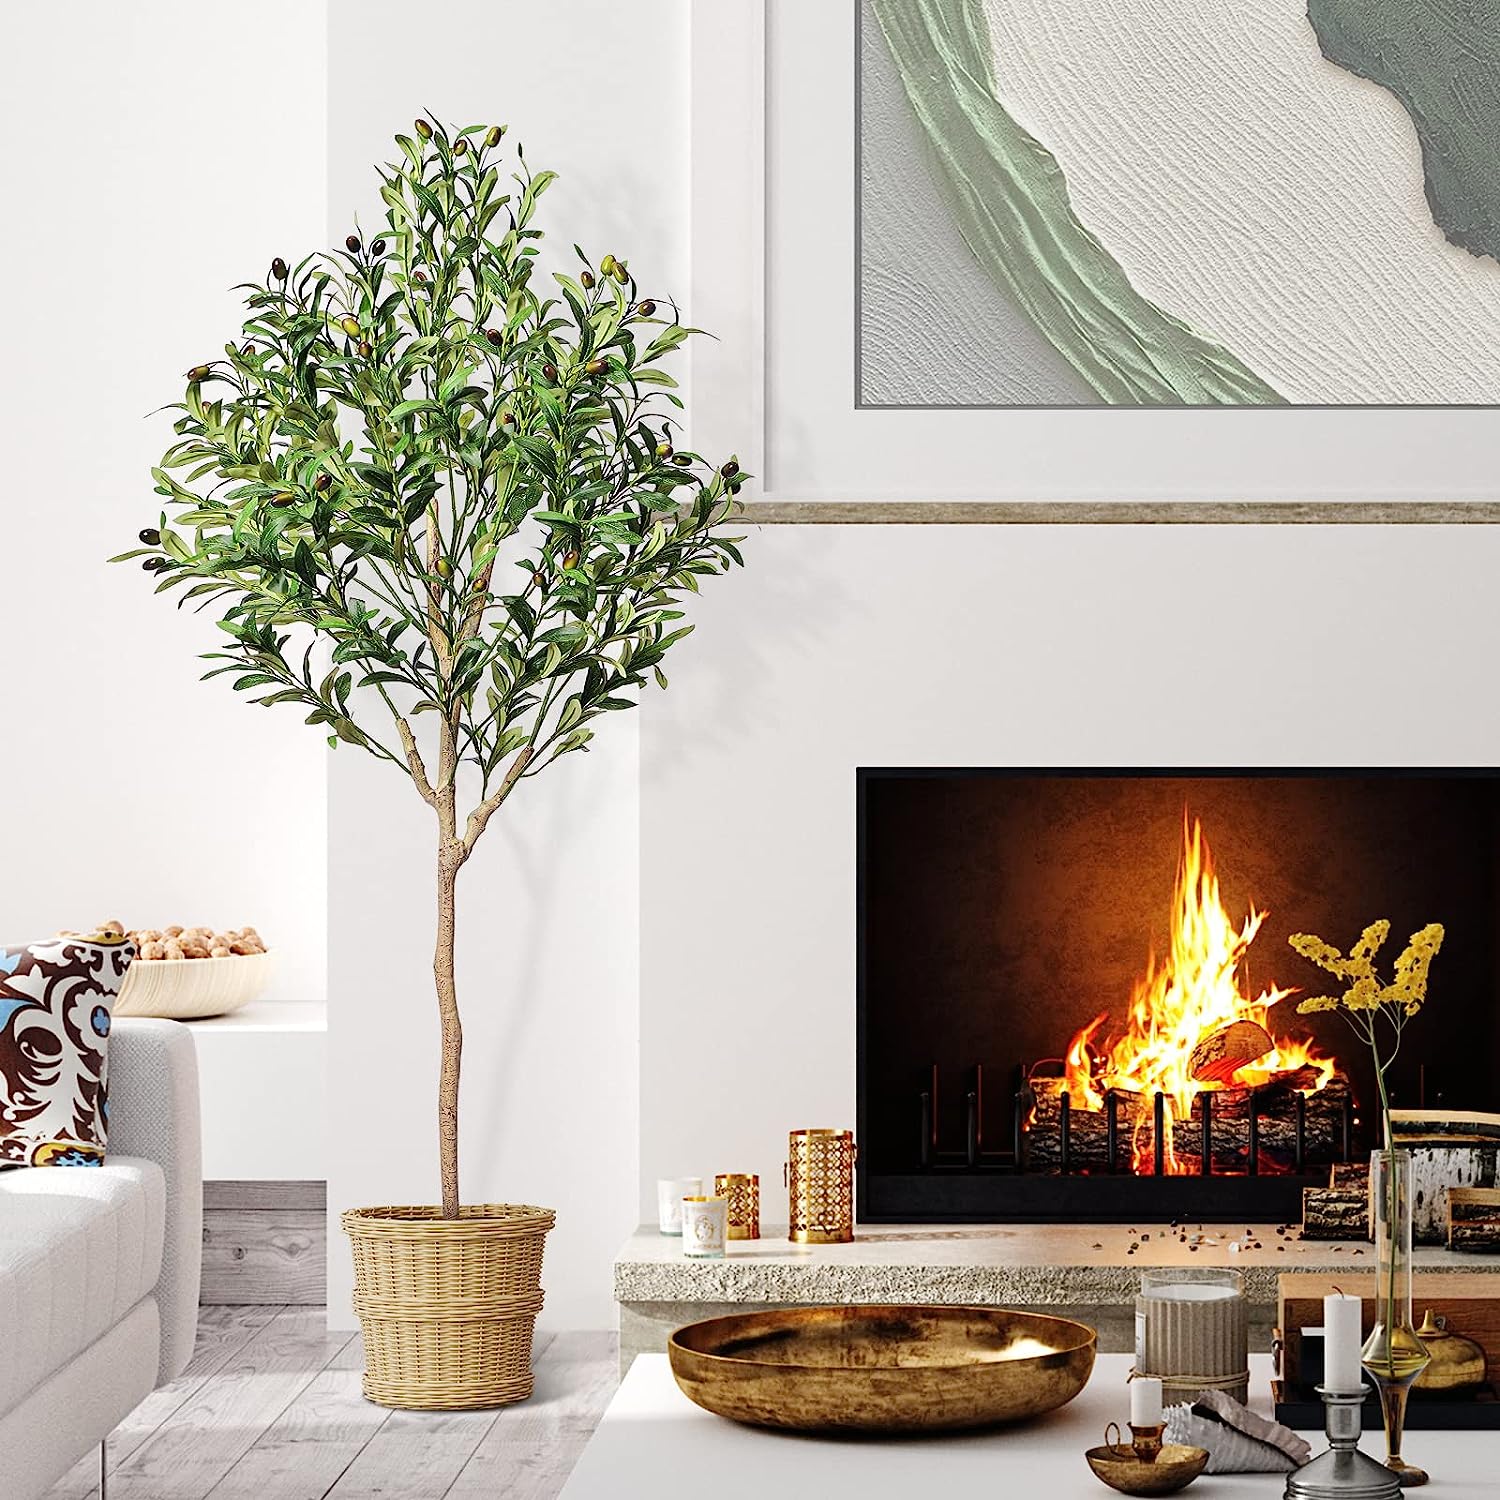 Faux Olive Tree Artificial Indoor 5.3 Feet Tall in Pot with Dried Moss Graceland Home and Living